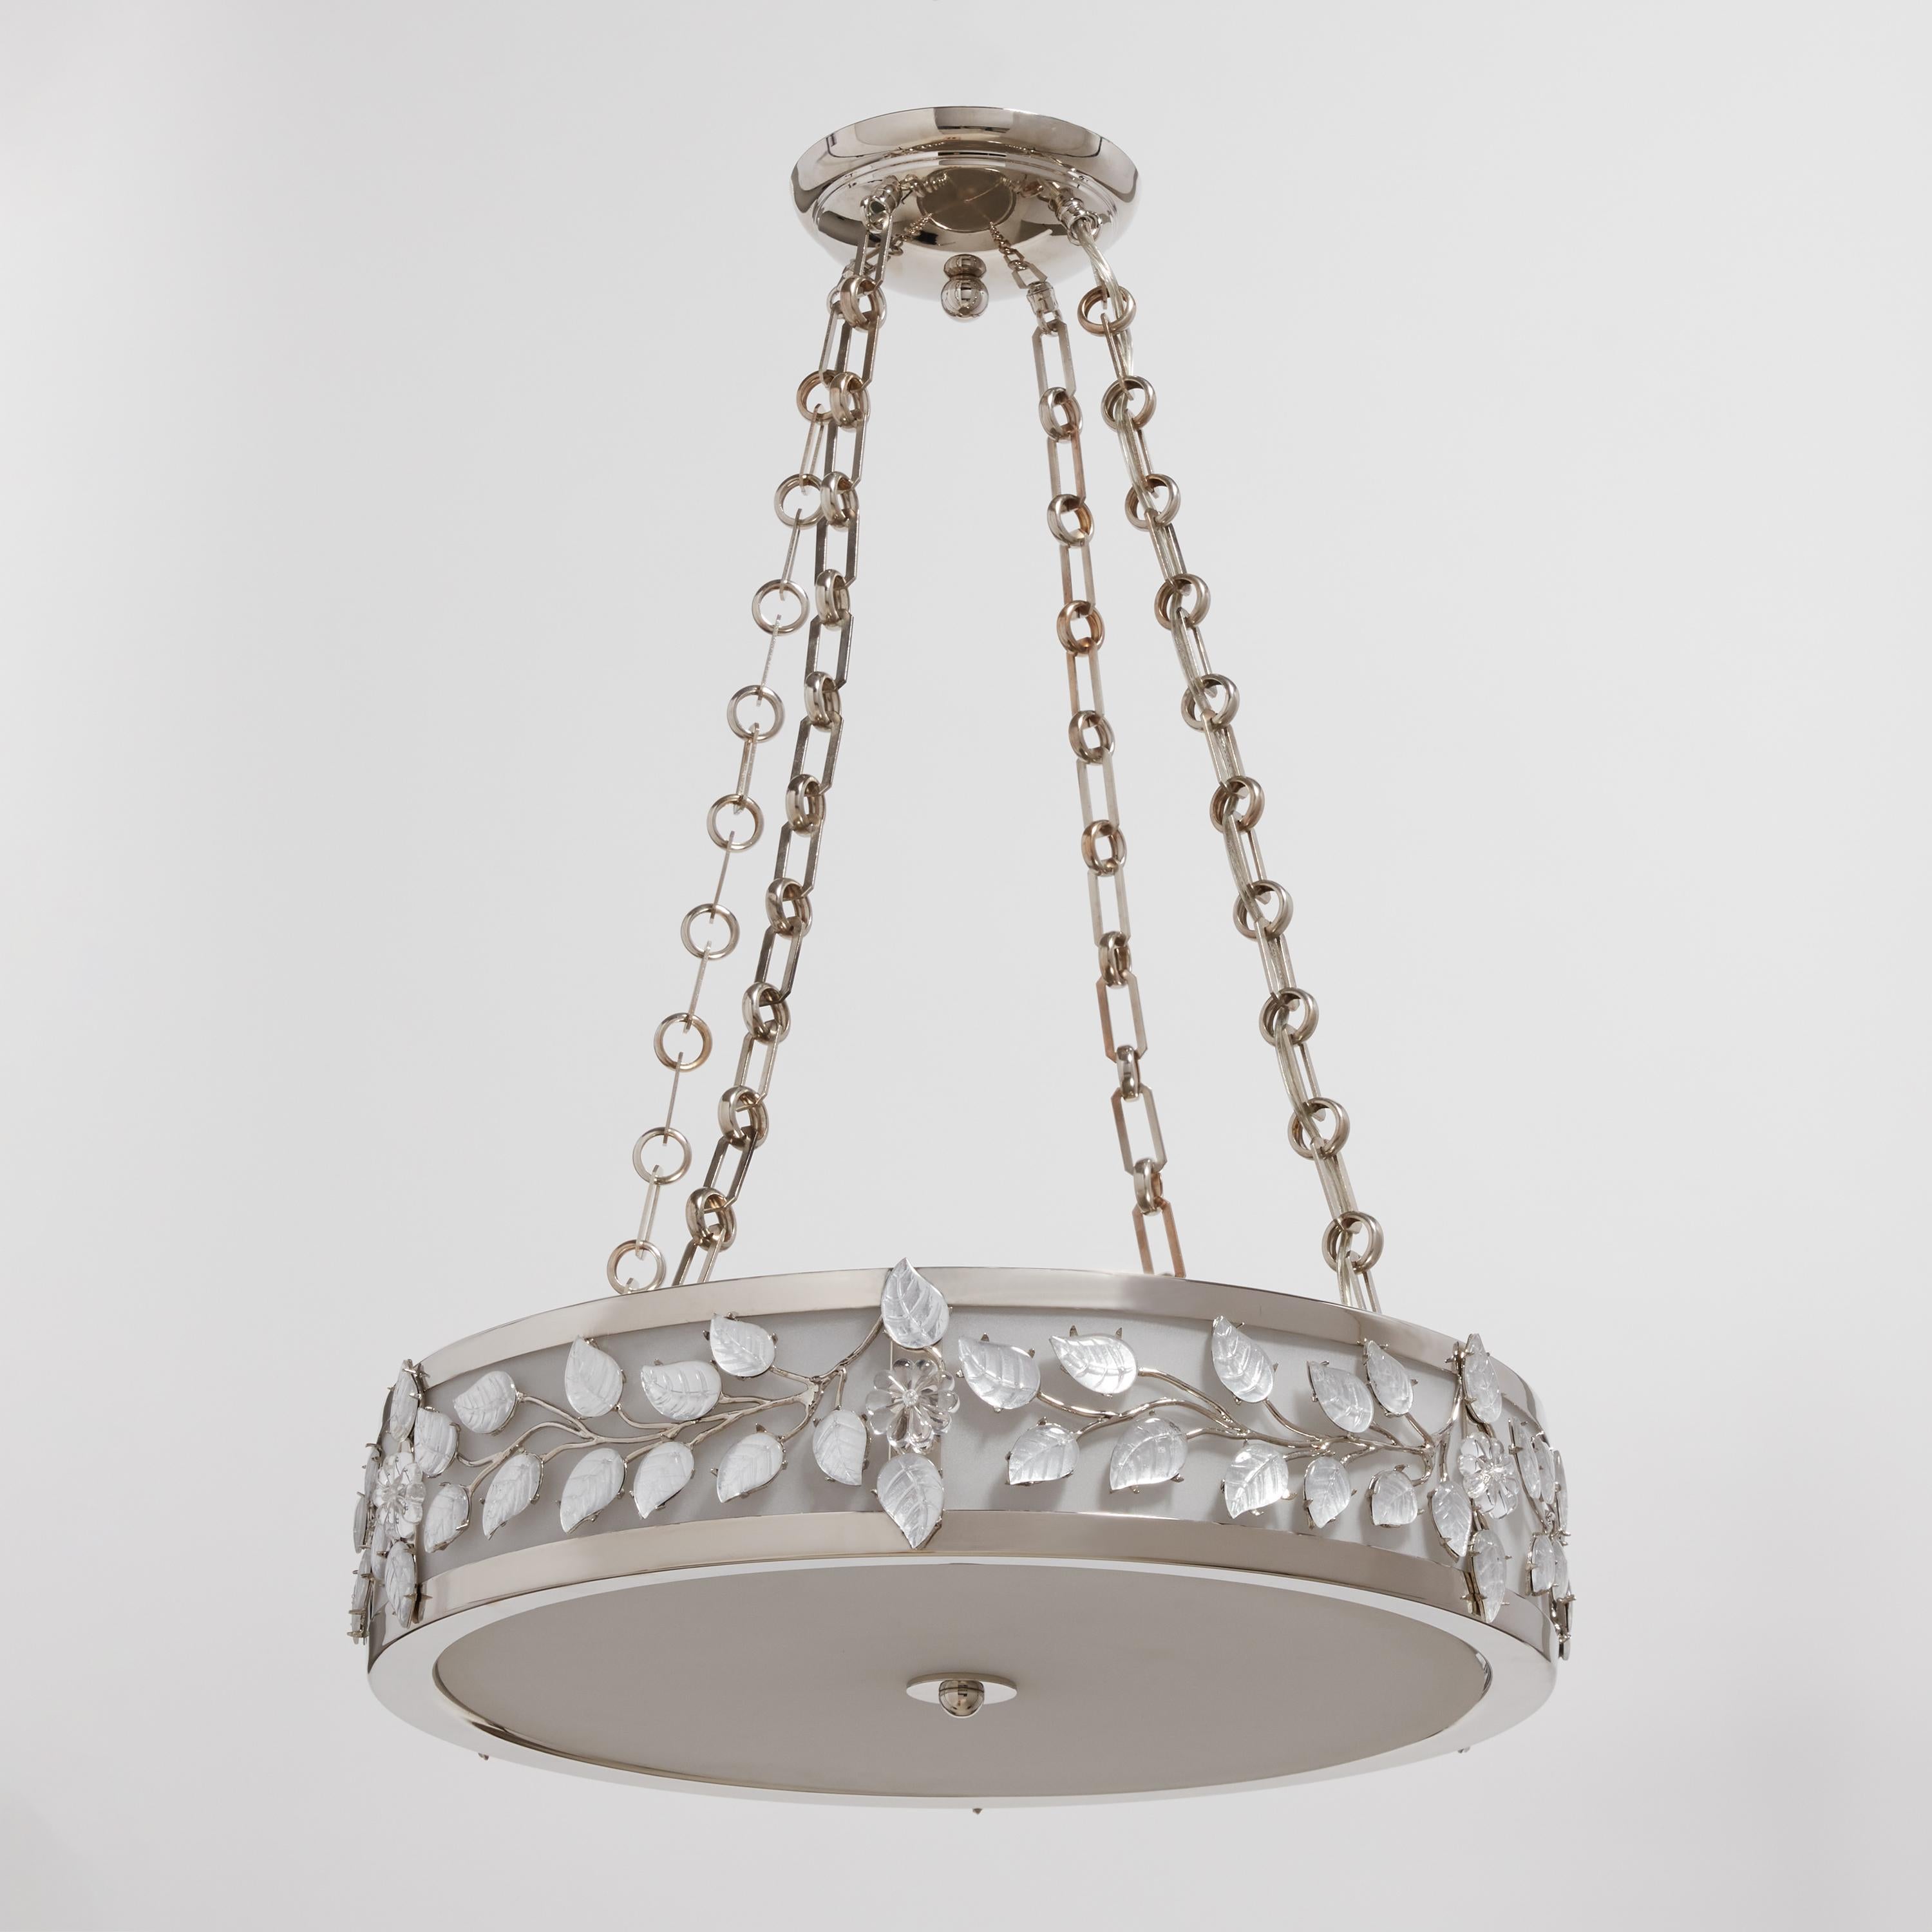 An Art Deco style pendant fixture designed by David Duncan. Featuring an exquisite nickel finish, this light is encircled by cast bronze branches with crystal leaves, and is suspended by four chains. This fixture is 20